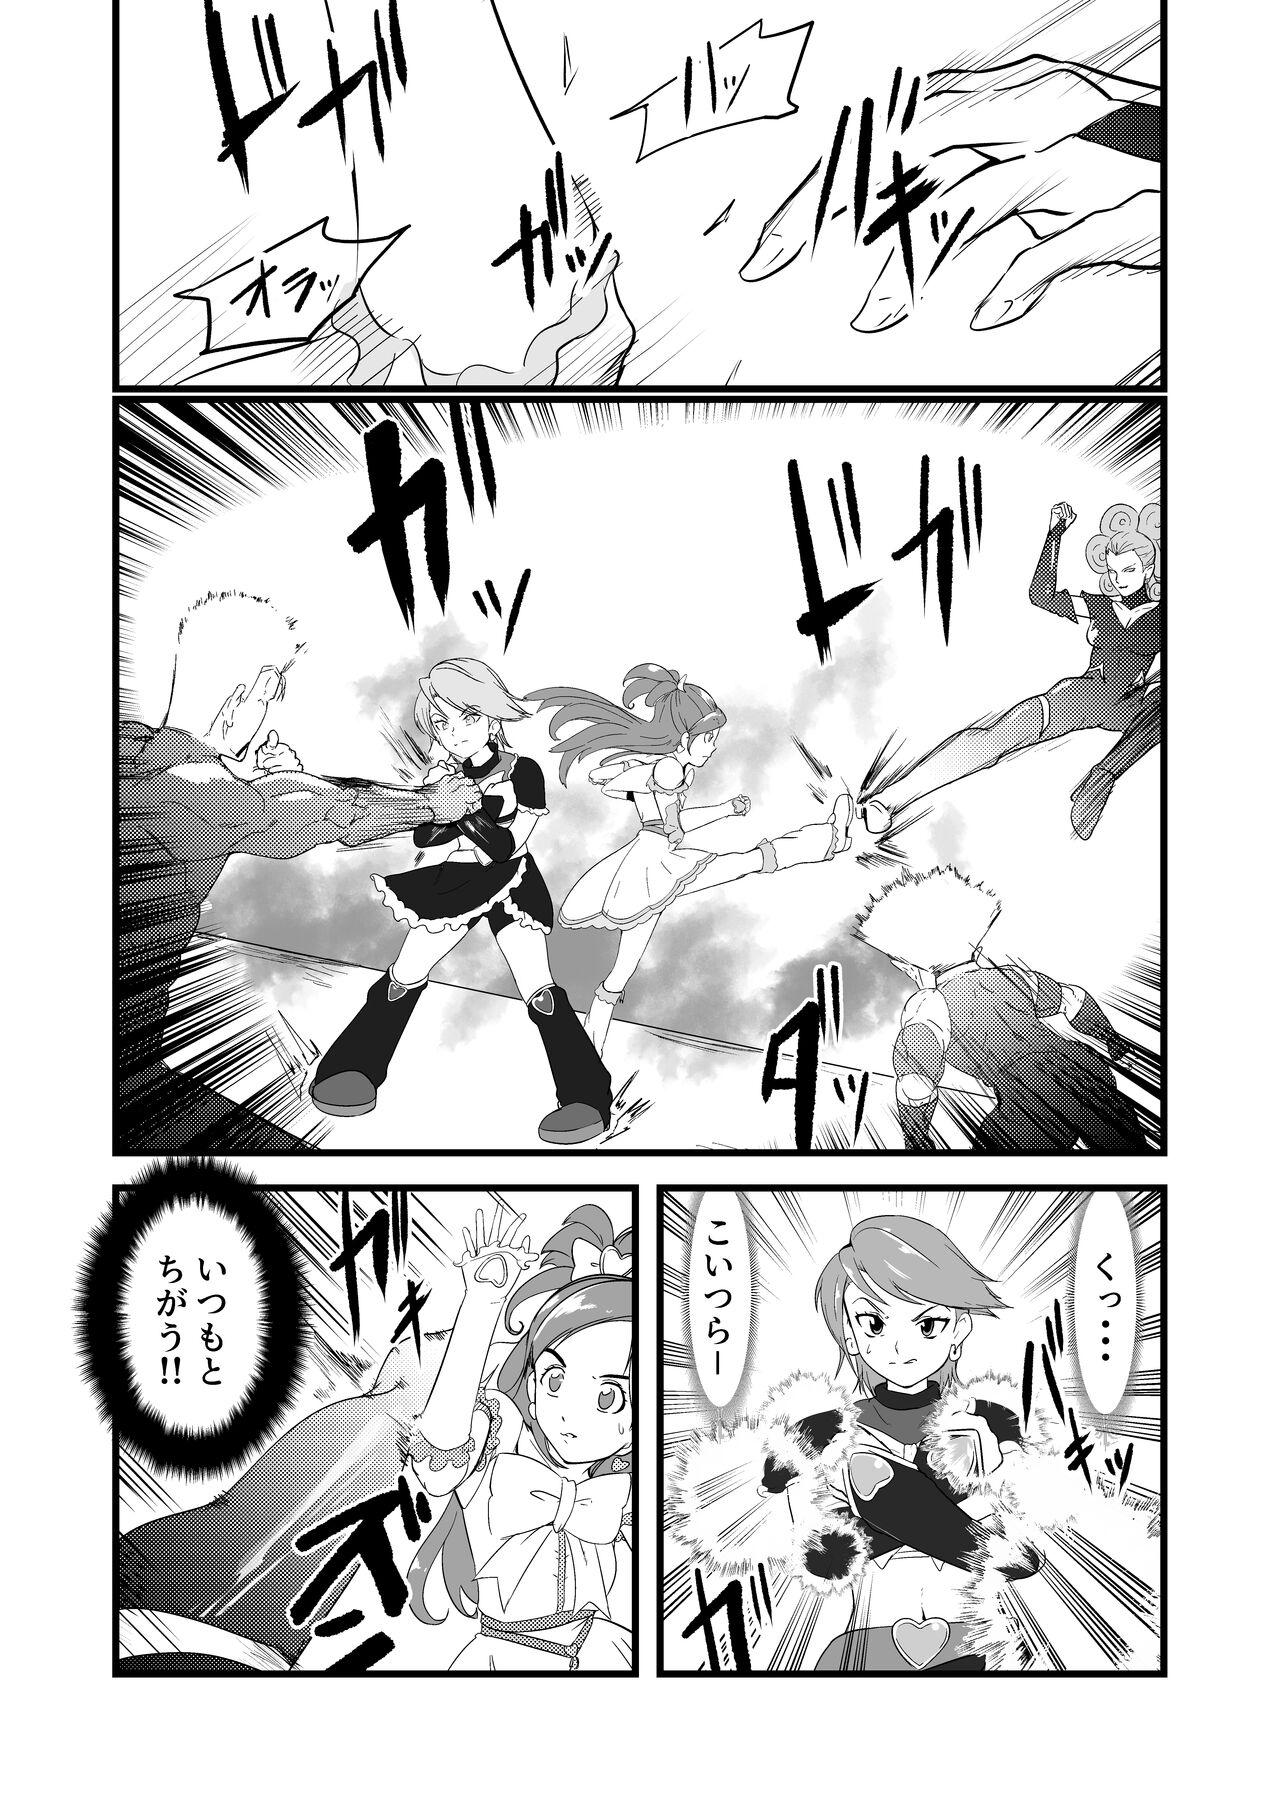 Dance Belly Crisis 7 - Pretty cure Stepbrother - Page 1